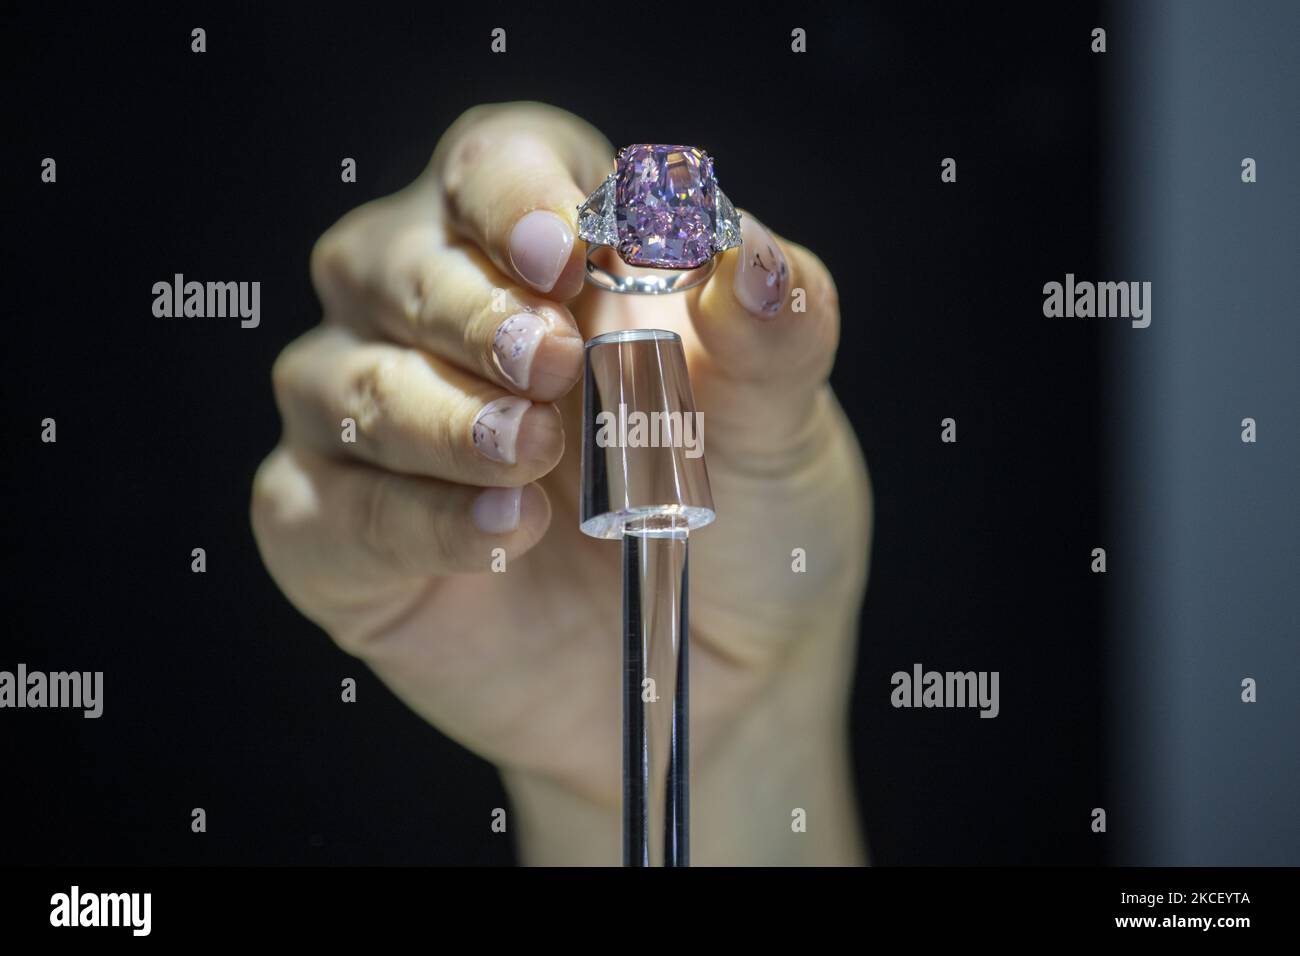 A woman holds the Sakura Diamond during preview at Christie's in Hong Kong, China, 20 May 2021. The 15.81 Carat Fancy Vivid Purple Pink Internally Flawless Type lla Diamond Ring will be auctioned in Hong Kong on 23 May 2021 for an estimated 25 million to 38 million US dollars. (Photo by Vernon Yuen/NurPhoto) Stock Photo